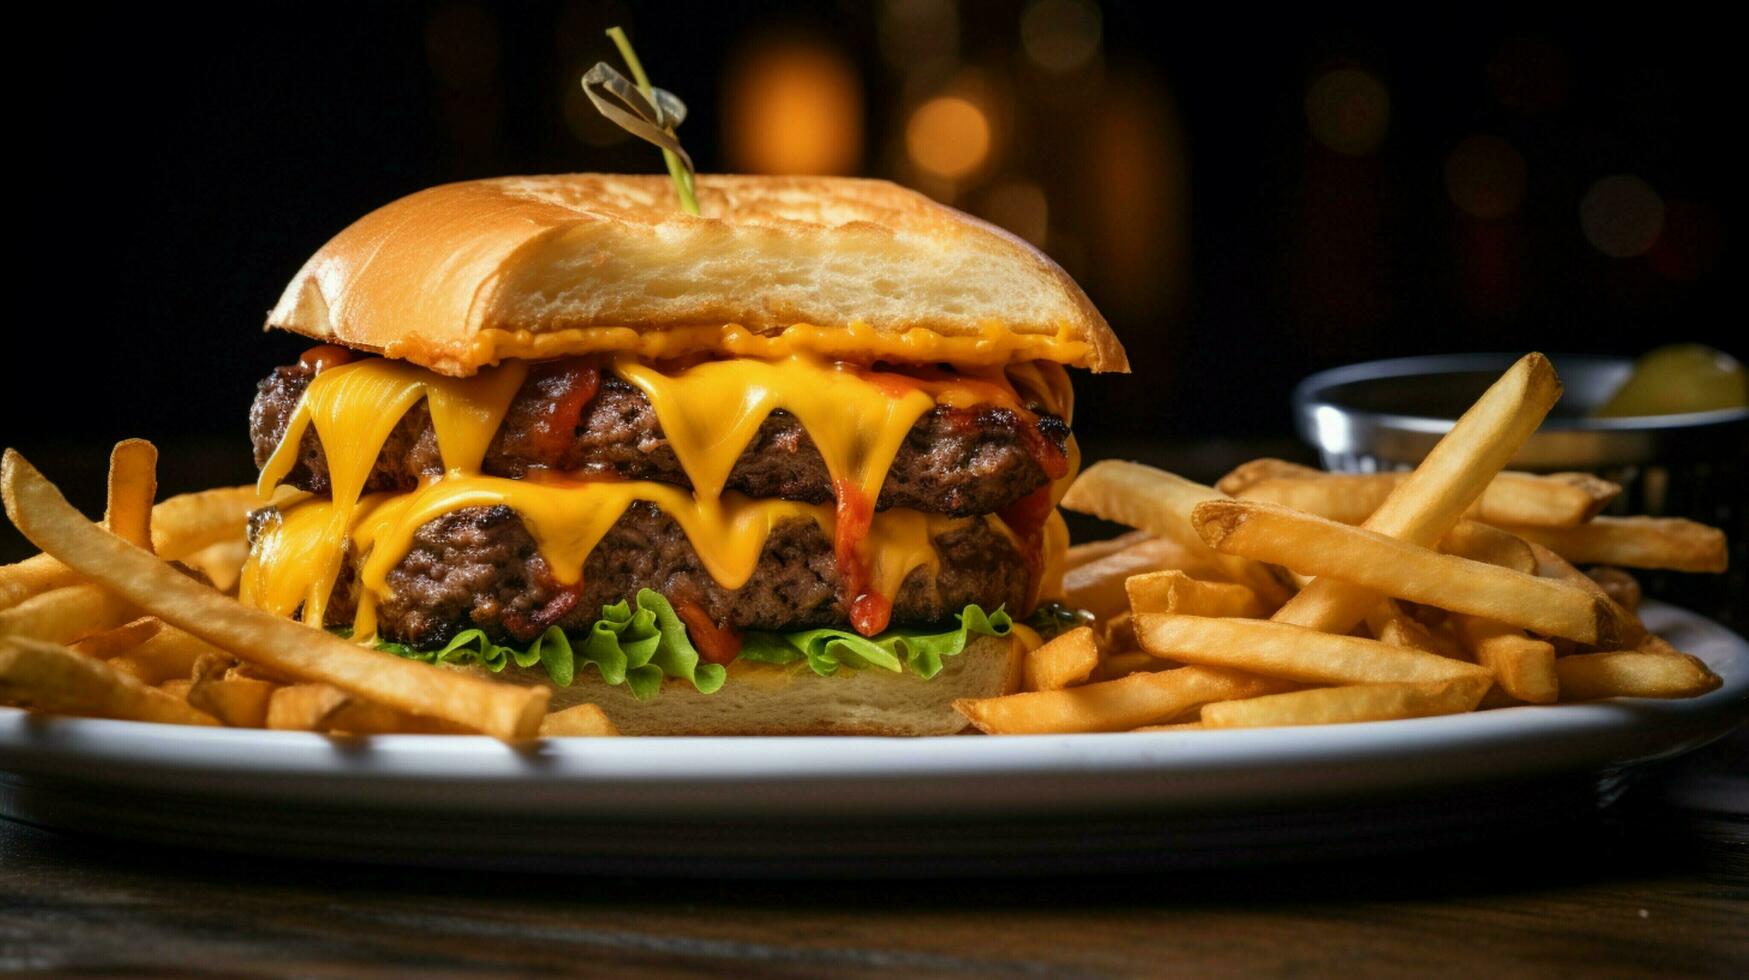 grilled cheeseburger with melted cheddar and fries photo